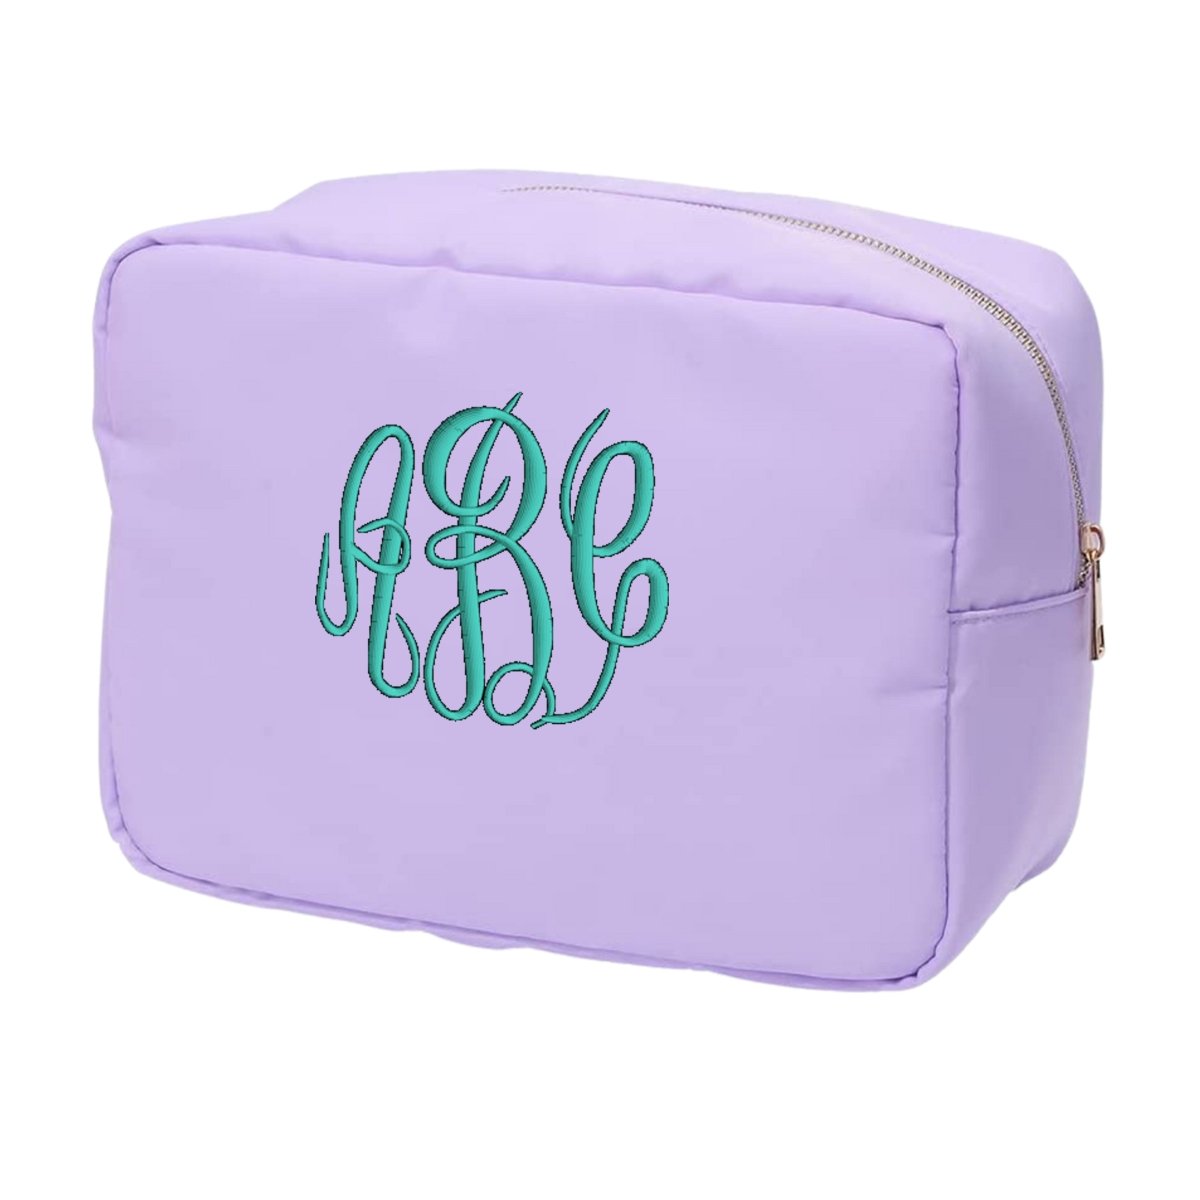 Monogrammed Large Pouch - United Monograms